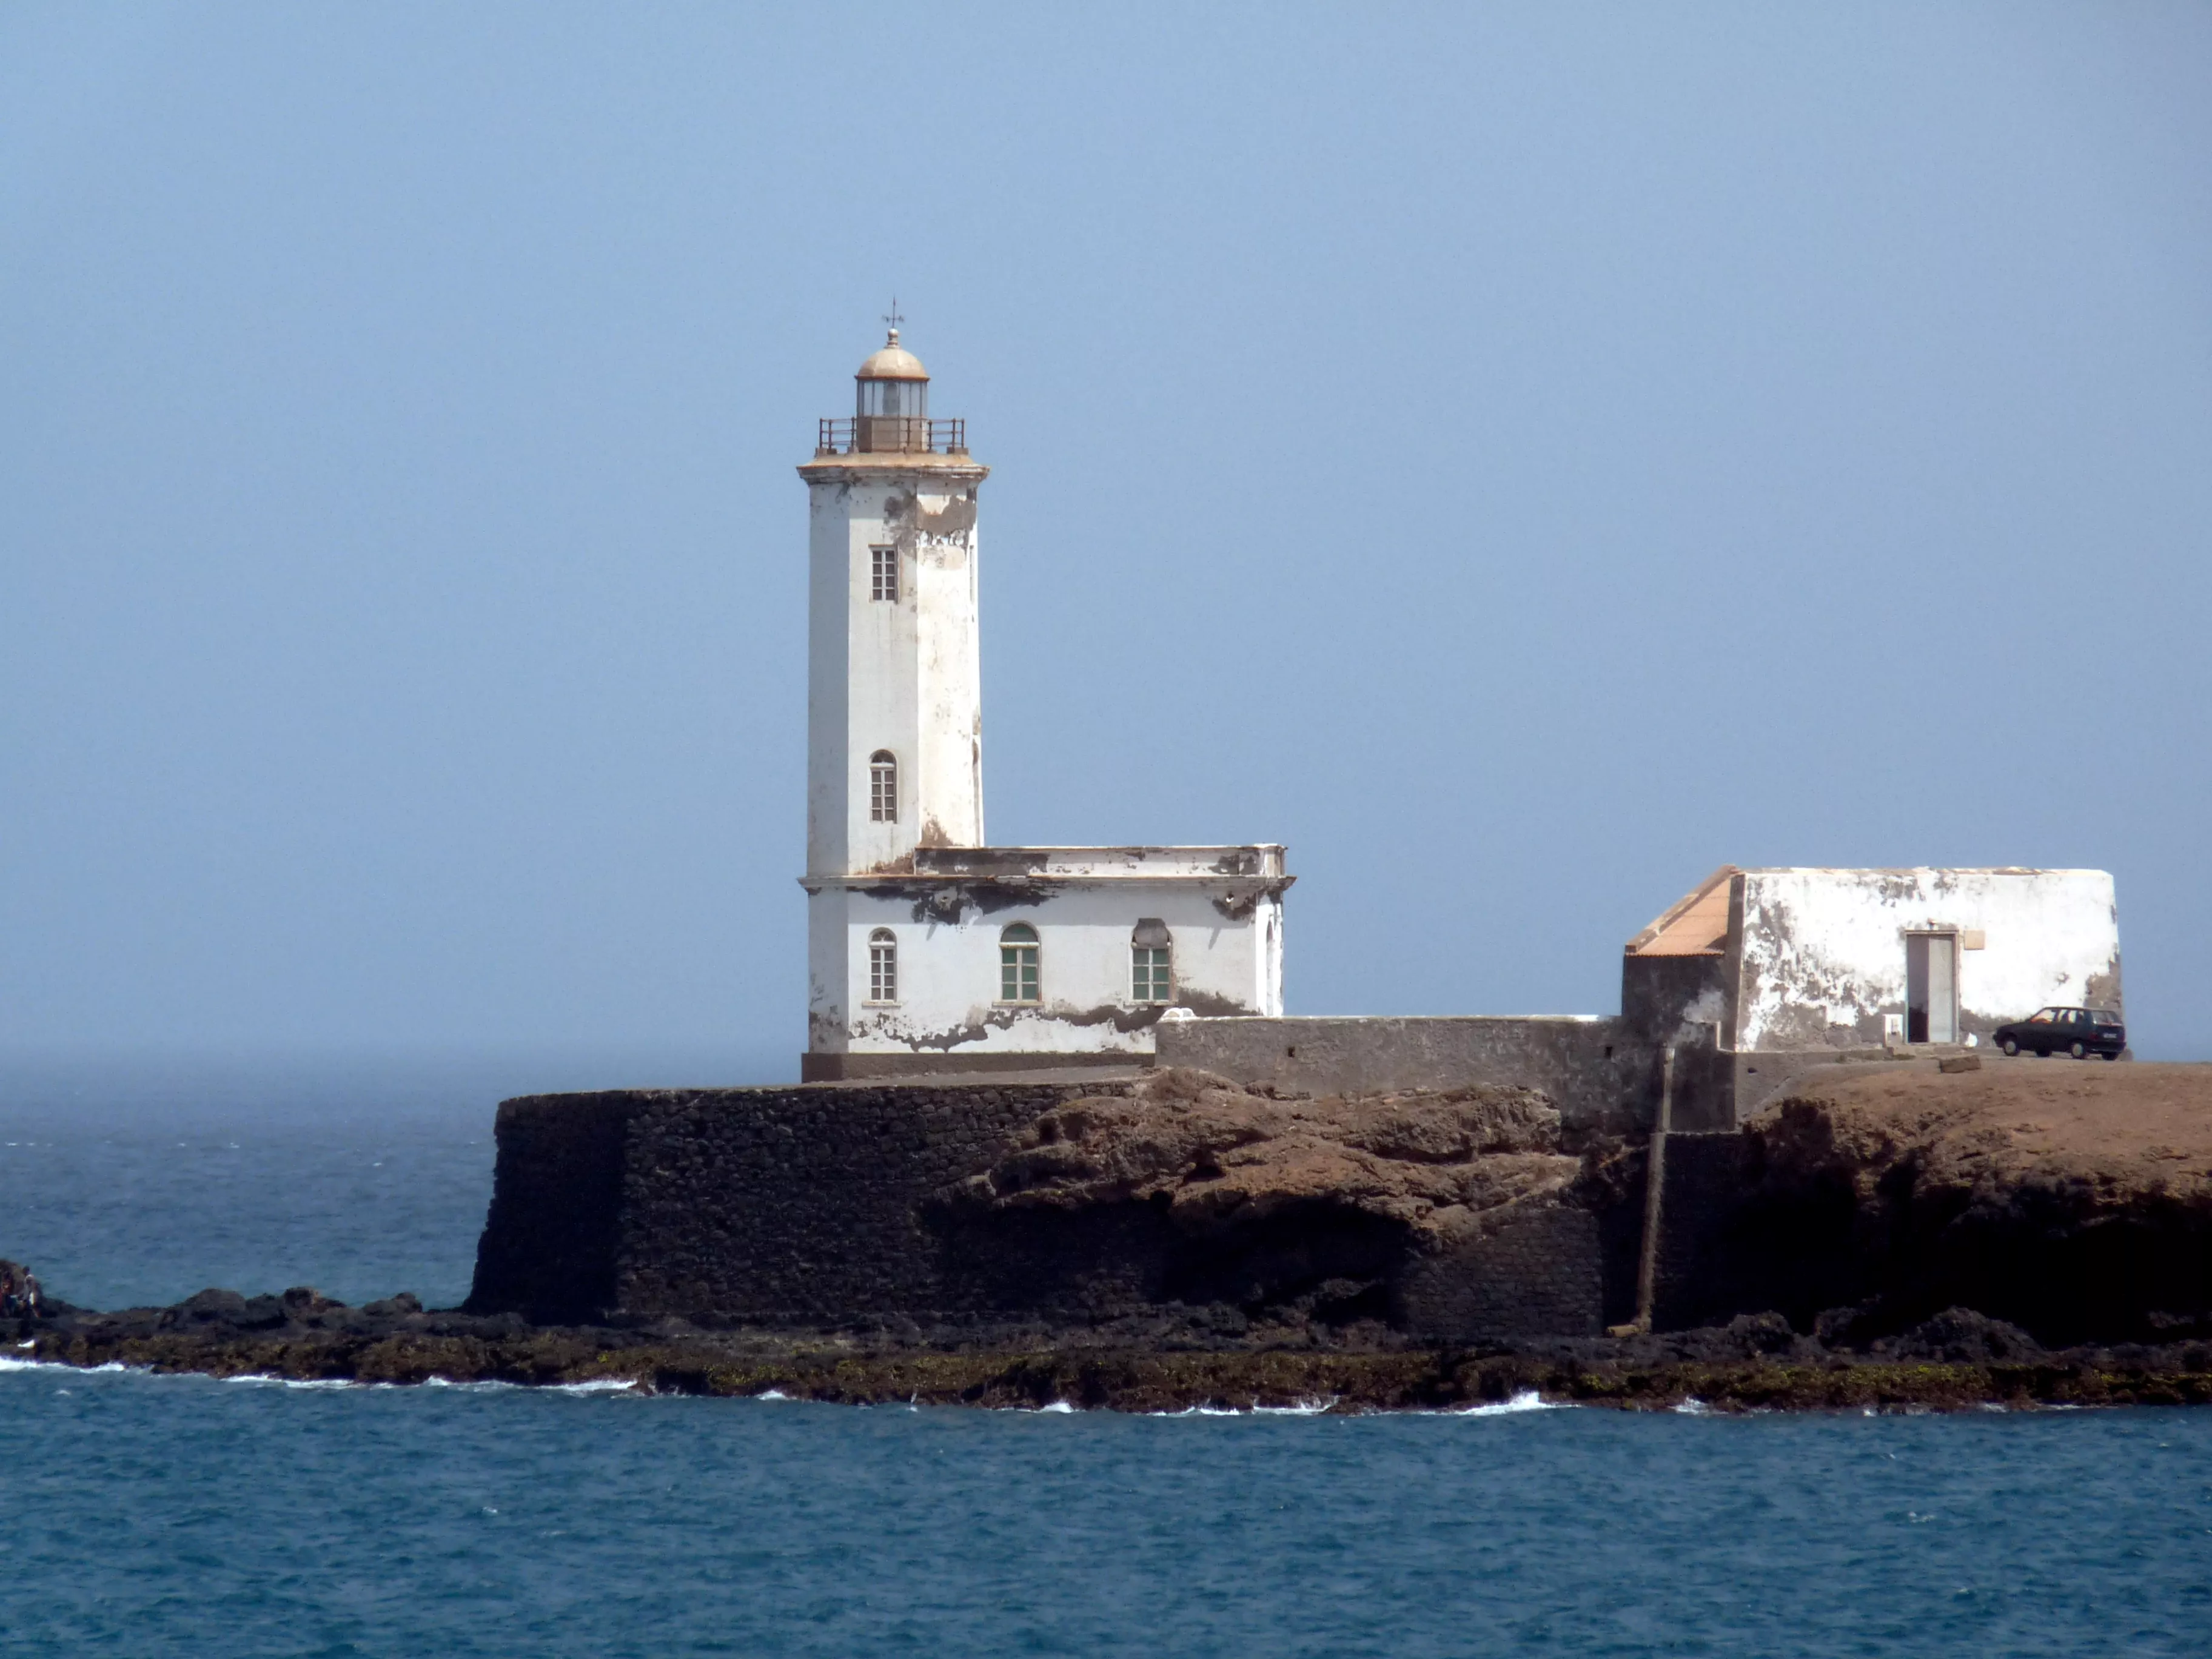 Lighthouse Dona Maria Pia in Cape Verde, Africa | Architecture - Rated 0.7